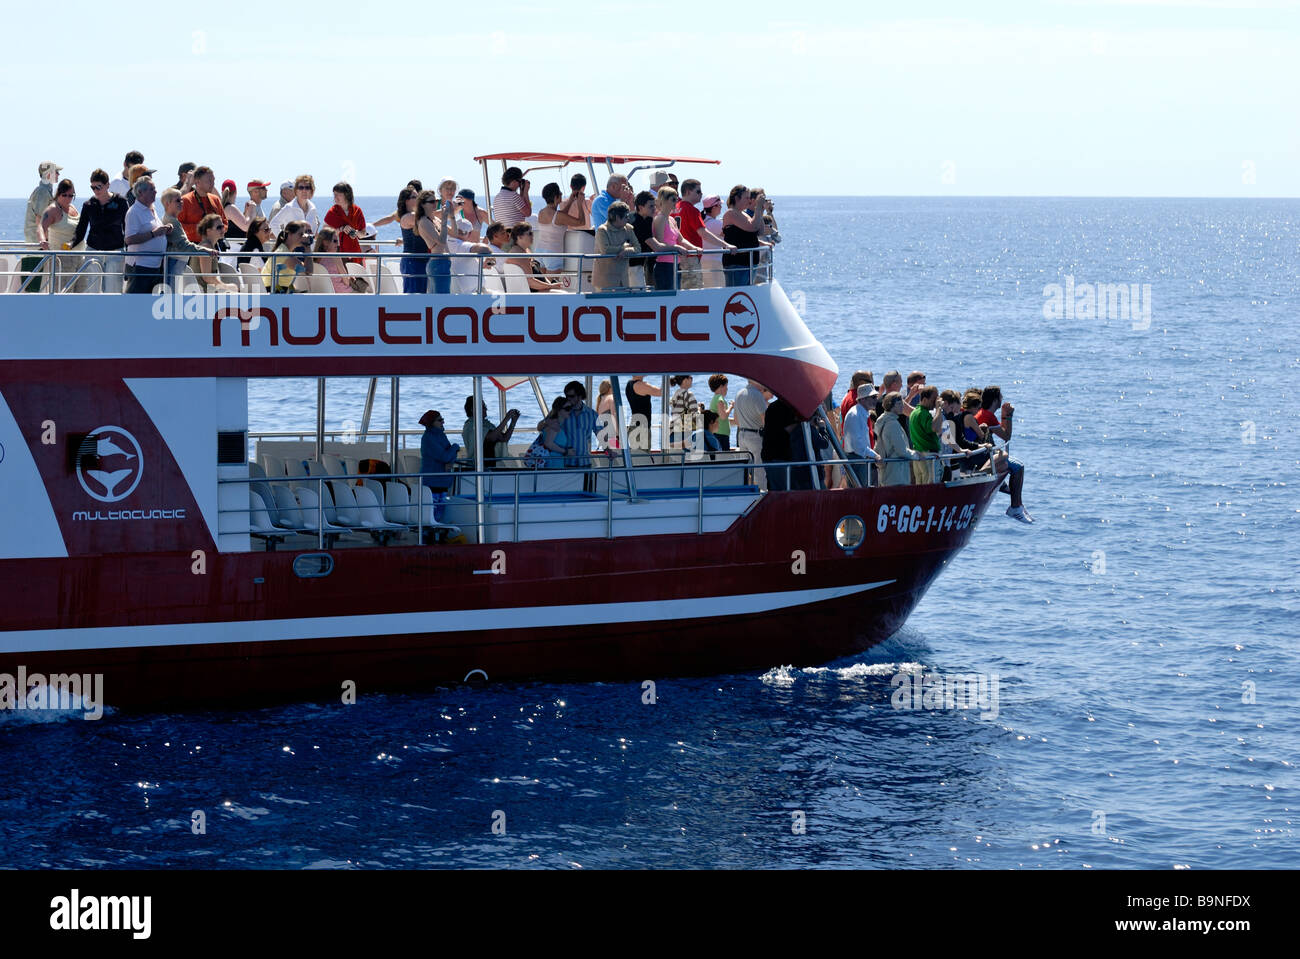 The exciment among the tourists on the dolphin search boat, Puerto Rico, Gran Canaria, Canary Islands, Spain, Europe. Stock Photo